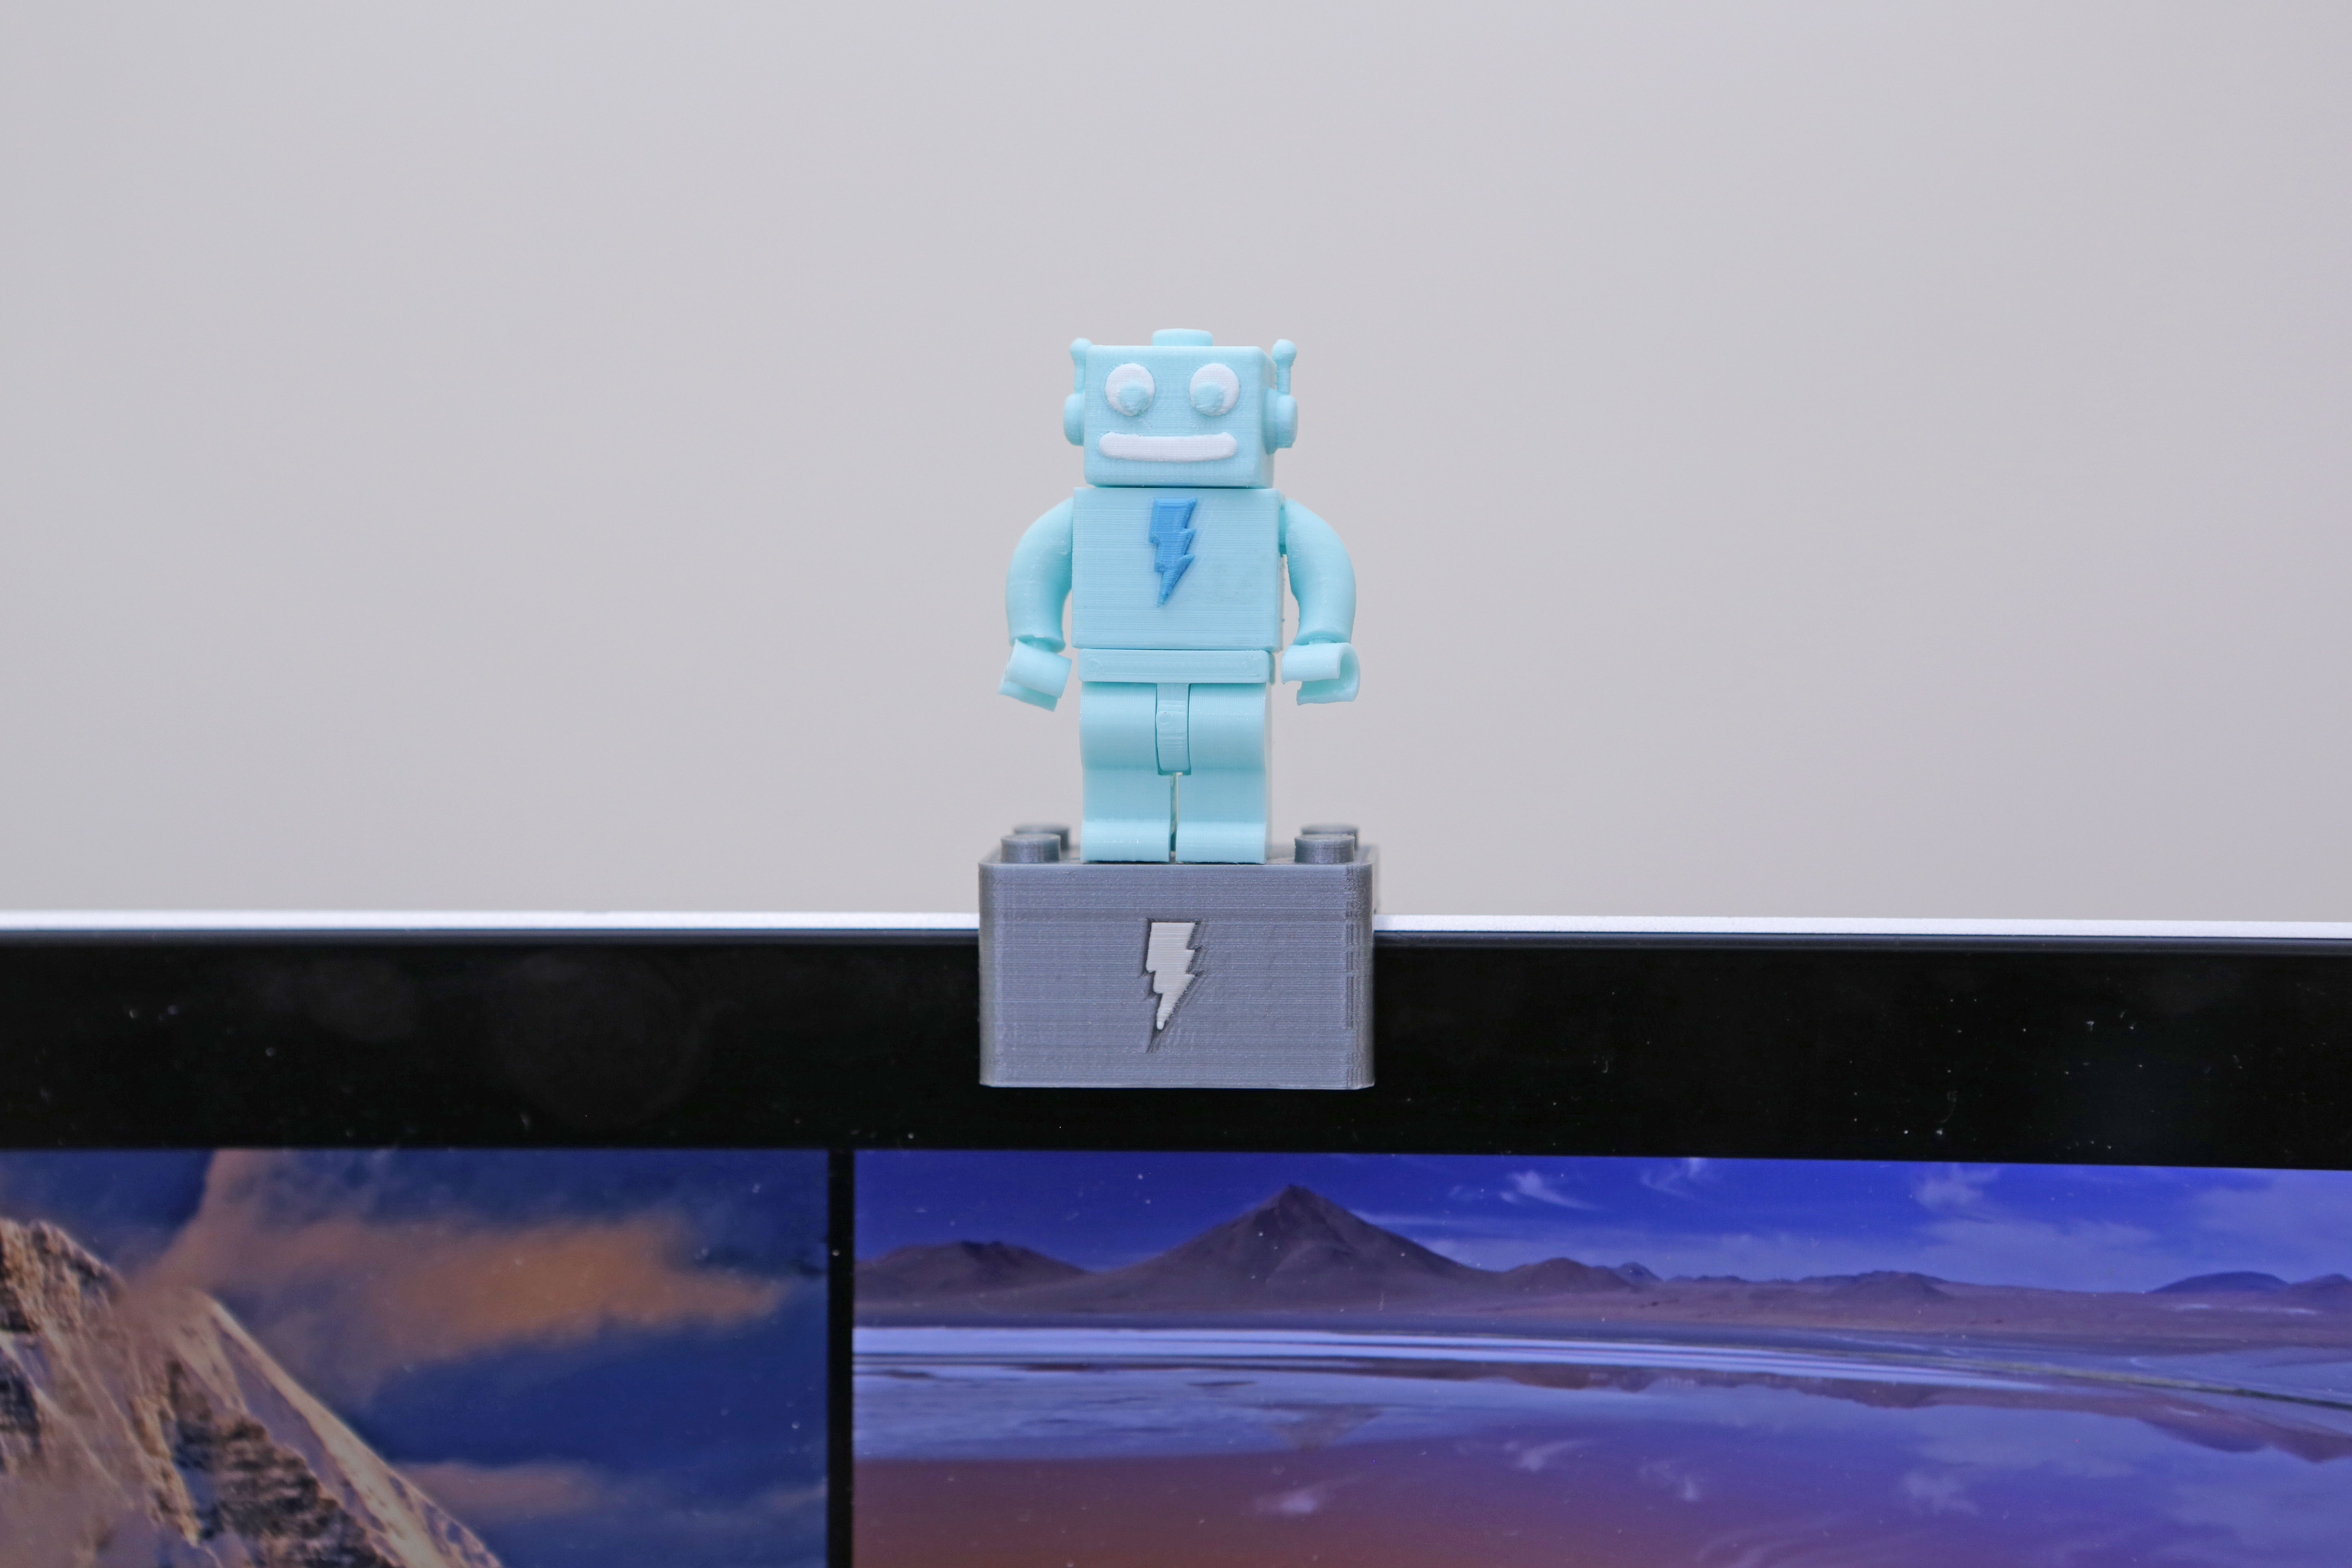 Webcam Cover-Up Lego brick with Adabot Mini Fig